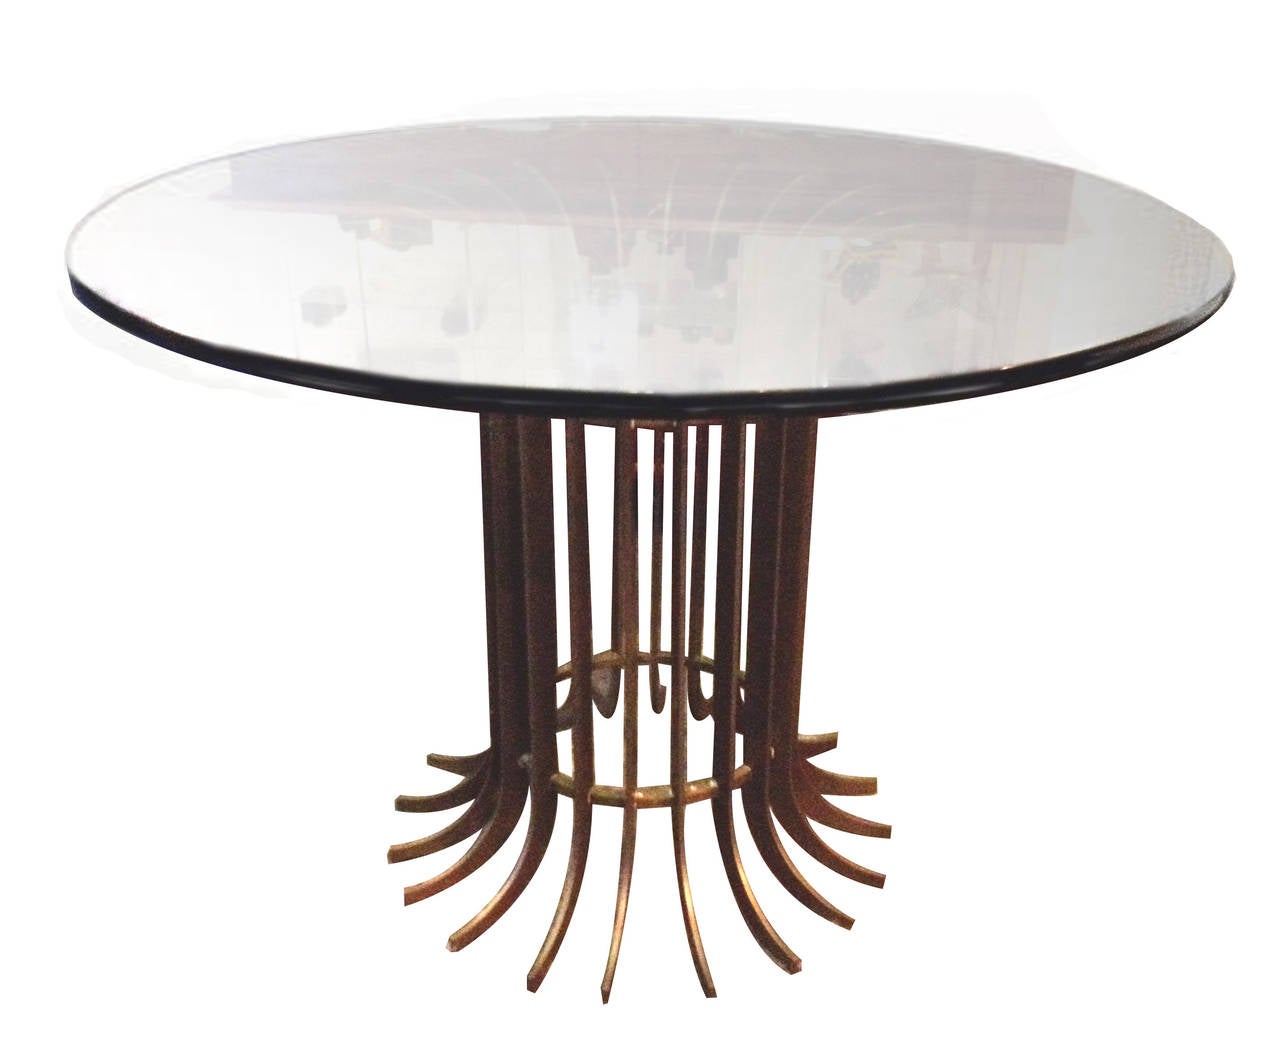 Arturo Pani bronze dining table with glass top.